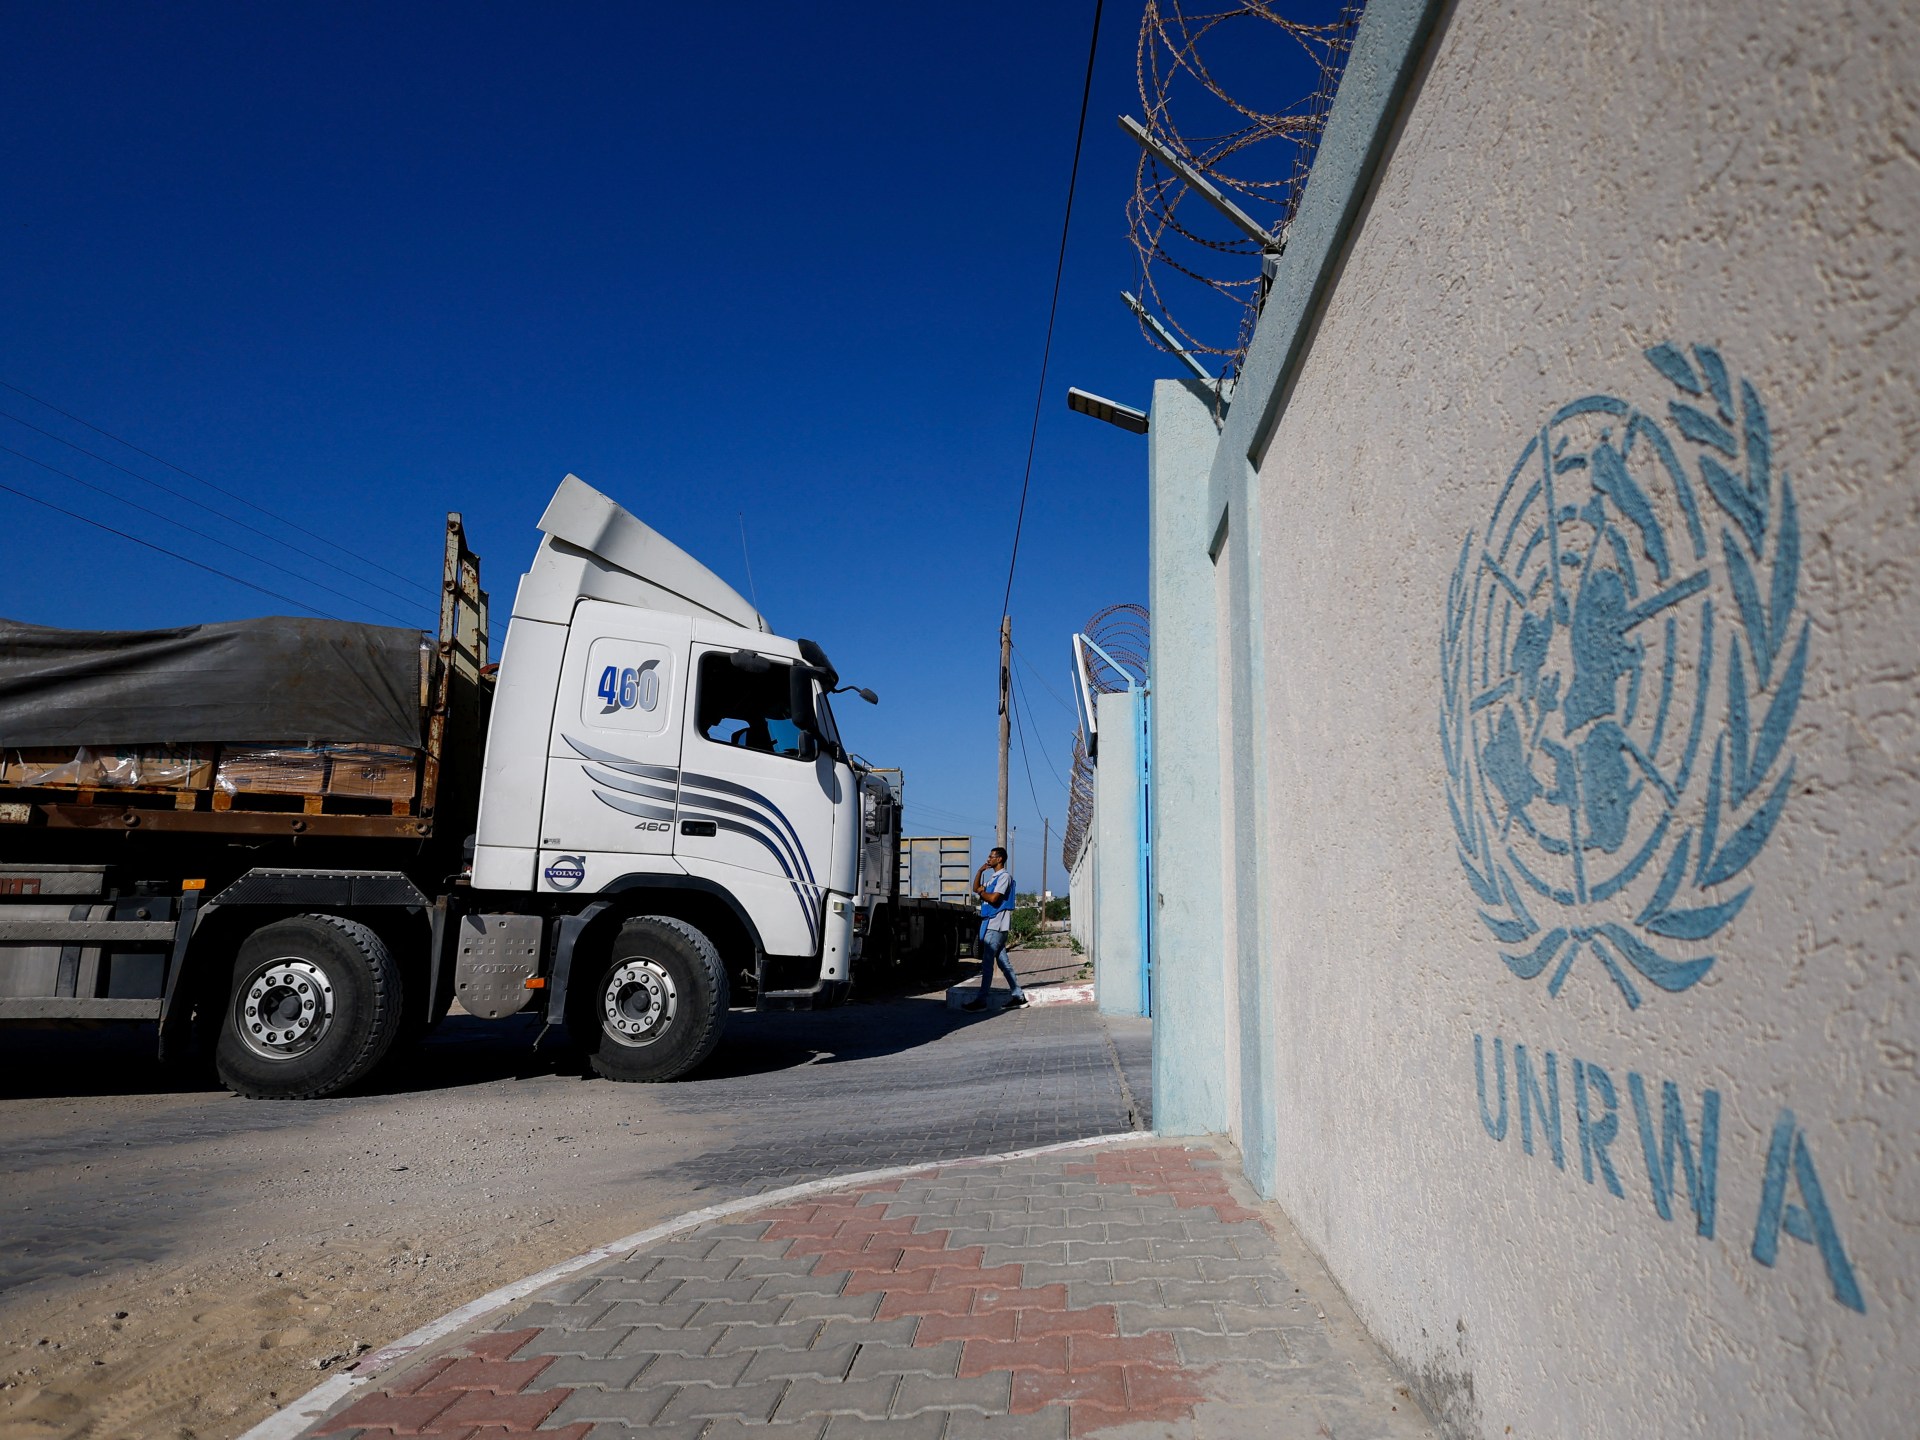 Photos: Limited aid enters Gaza as Israeli bombing compounds dire situation